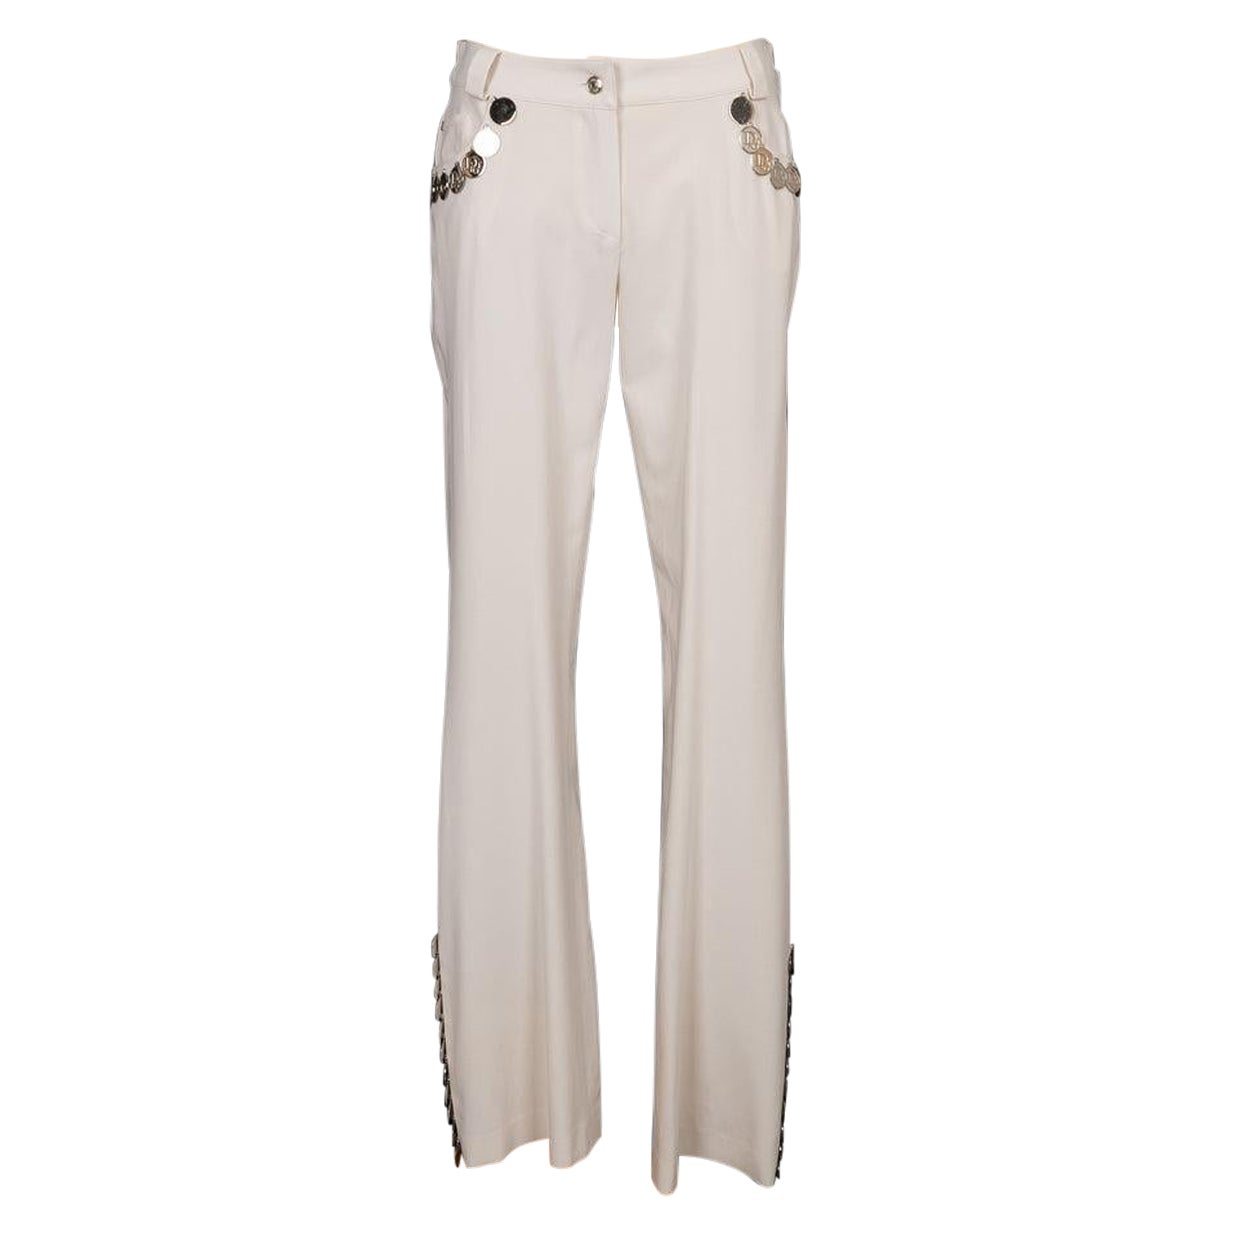 Christian Dior Blended Wool Pants with Silvery Metal Medallion Charms For Sale